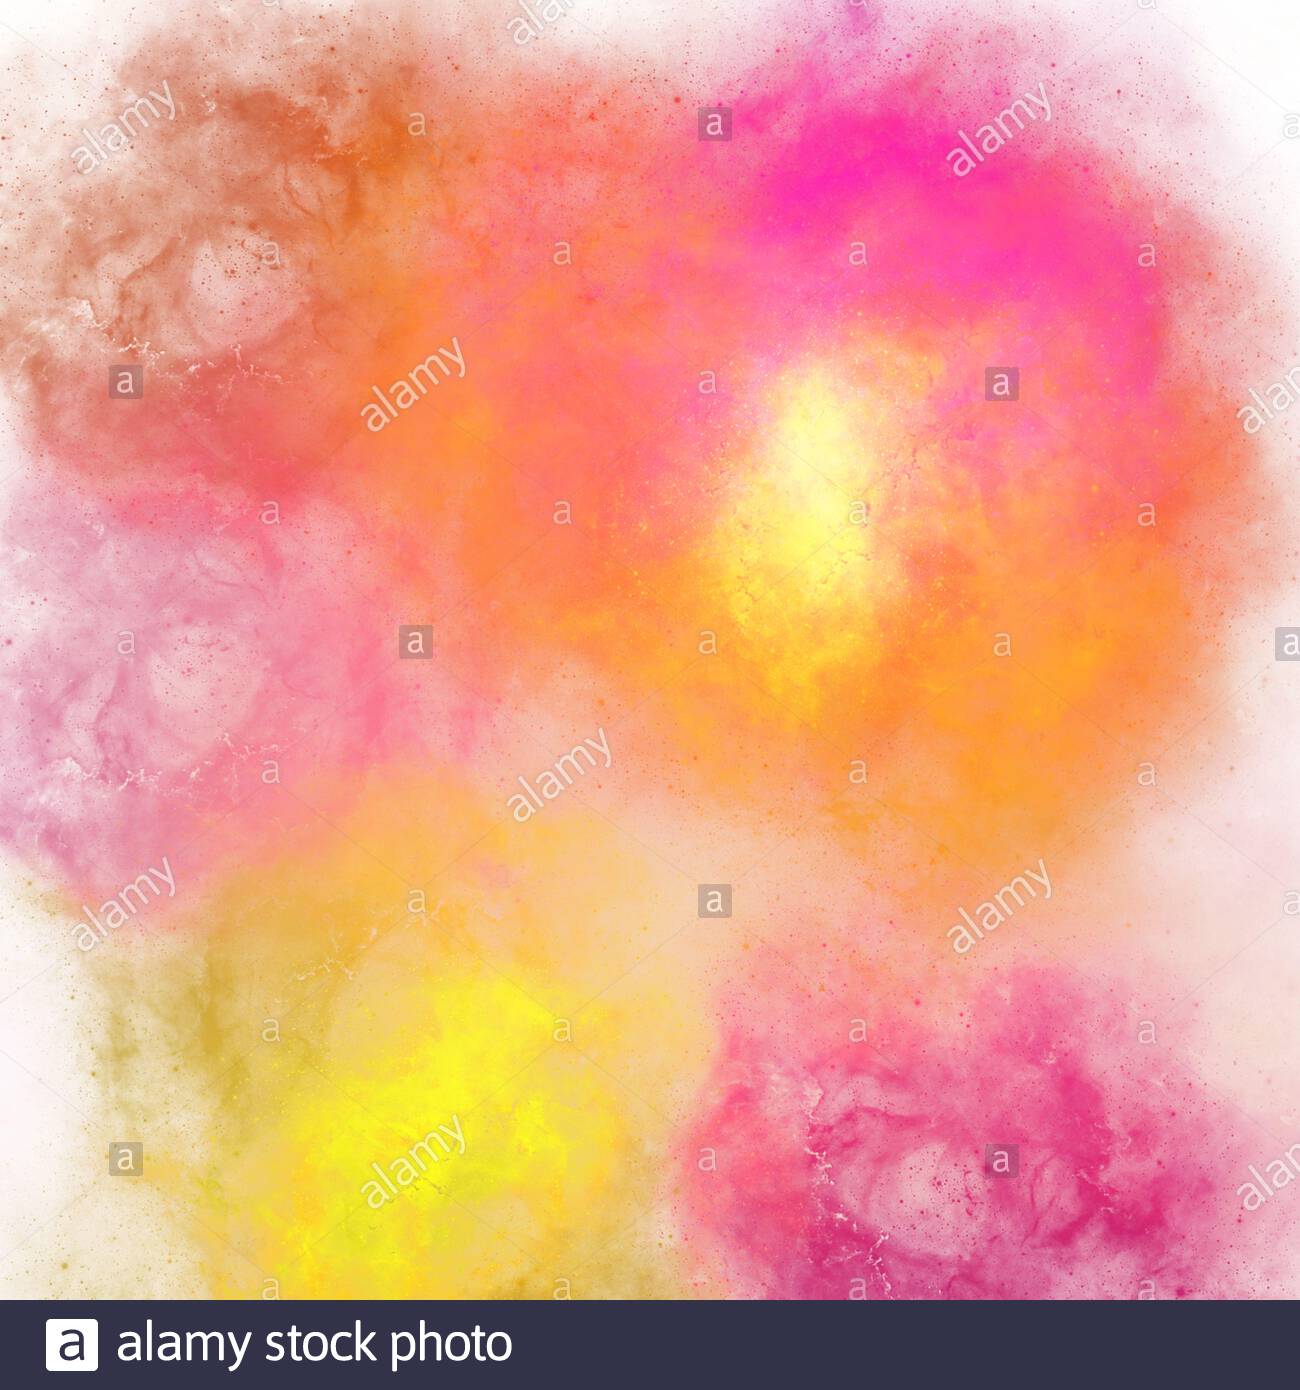 Red Pink Orange Yellow Spot Of Watercolor Paint Gradient Abstract